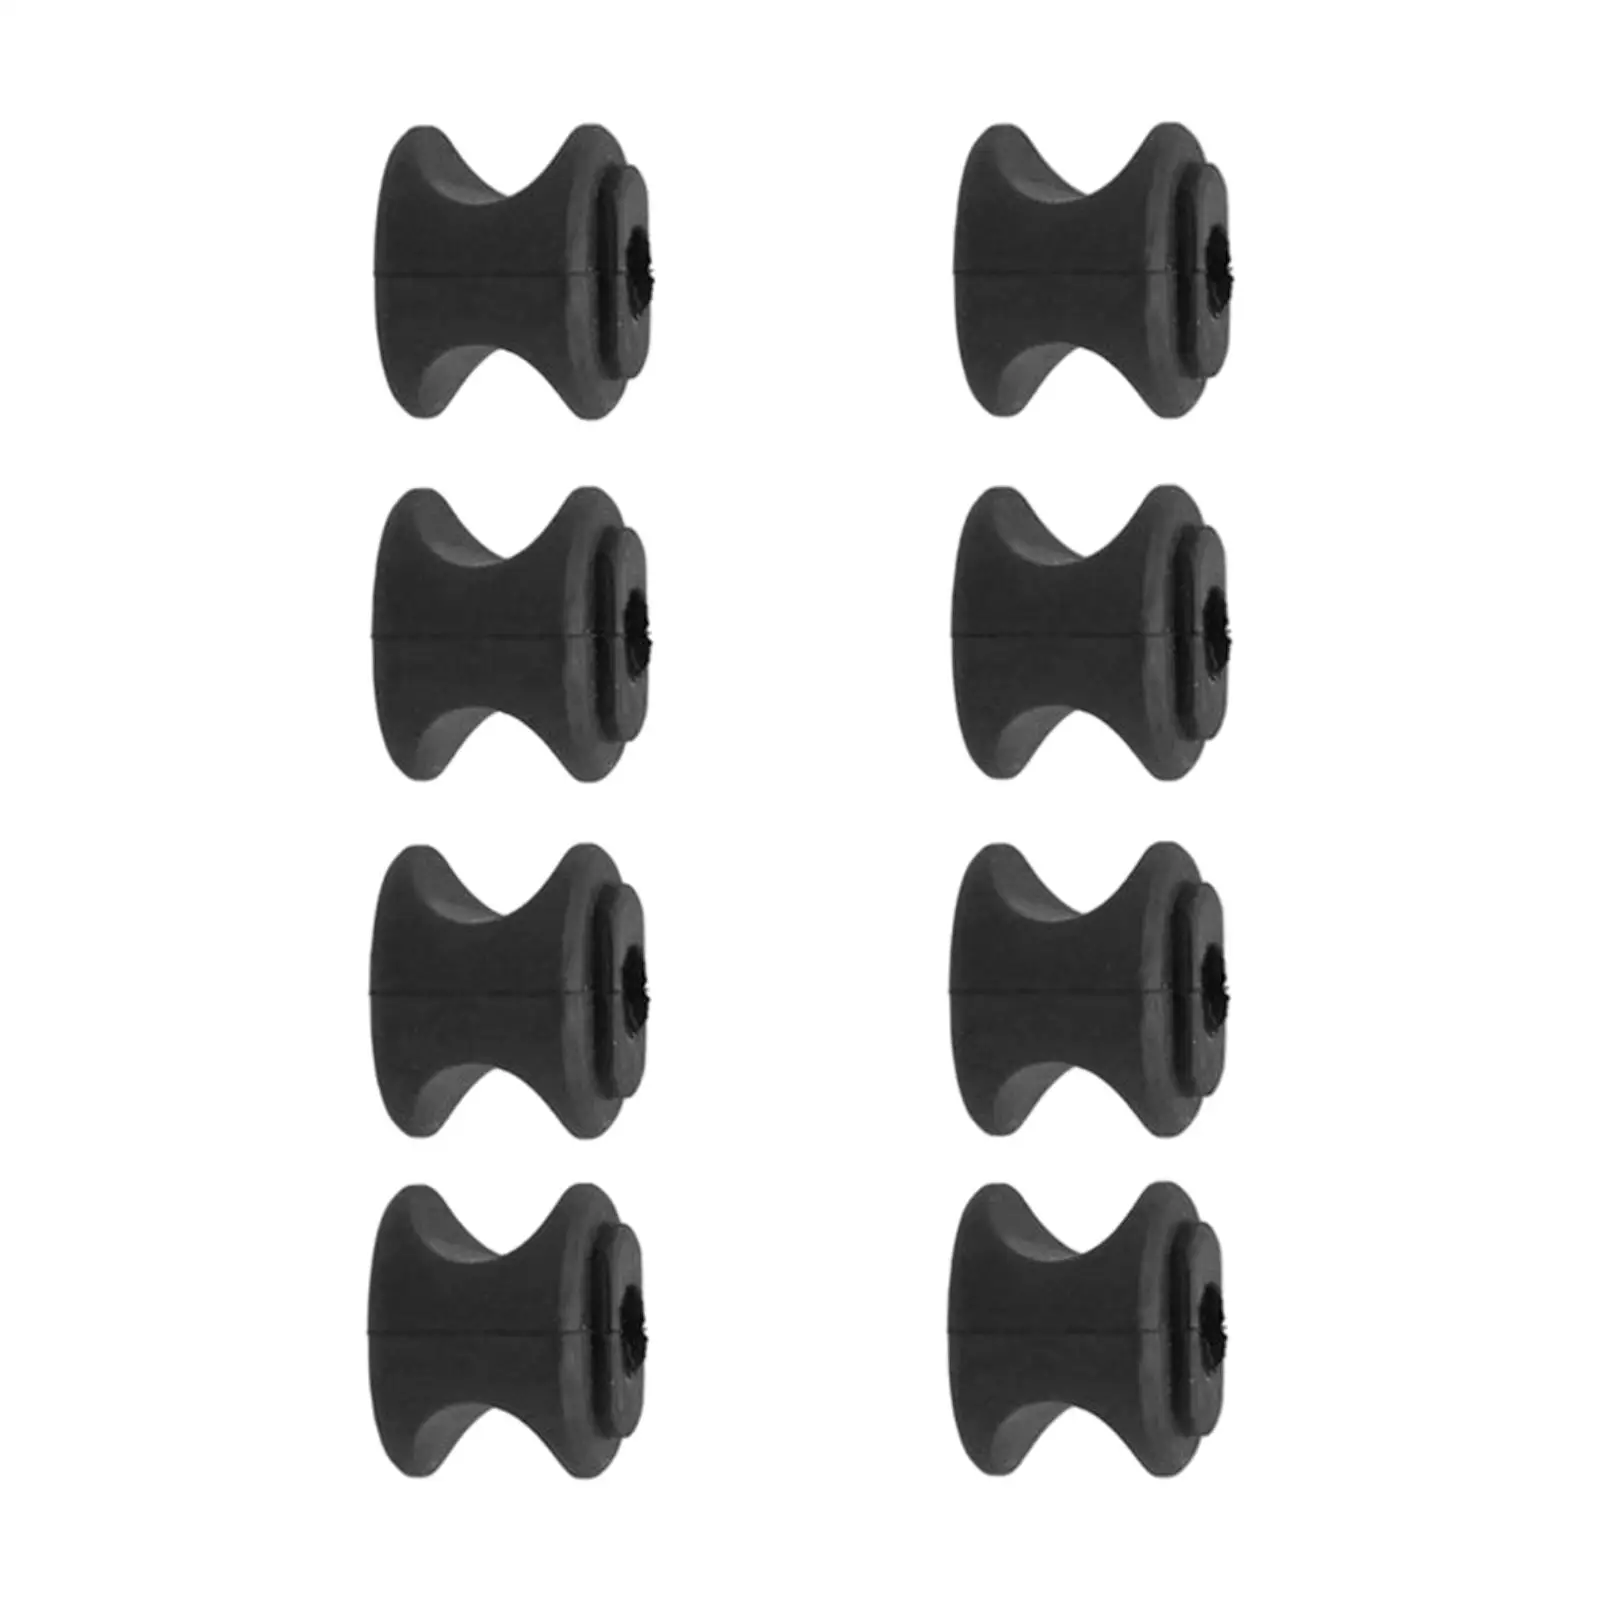 8Pcs Rubber Rear Stabilizer Support Bushing Durable for C Class W204 08-11 ACC Auto Parts Replacement